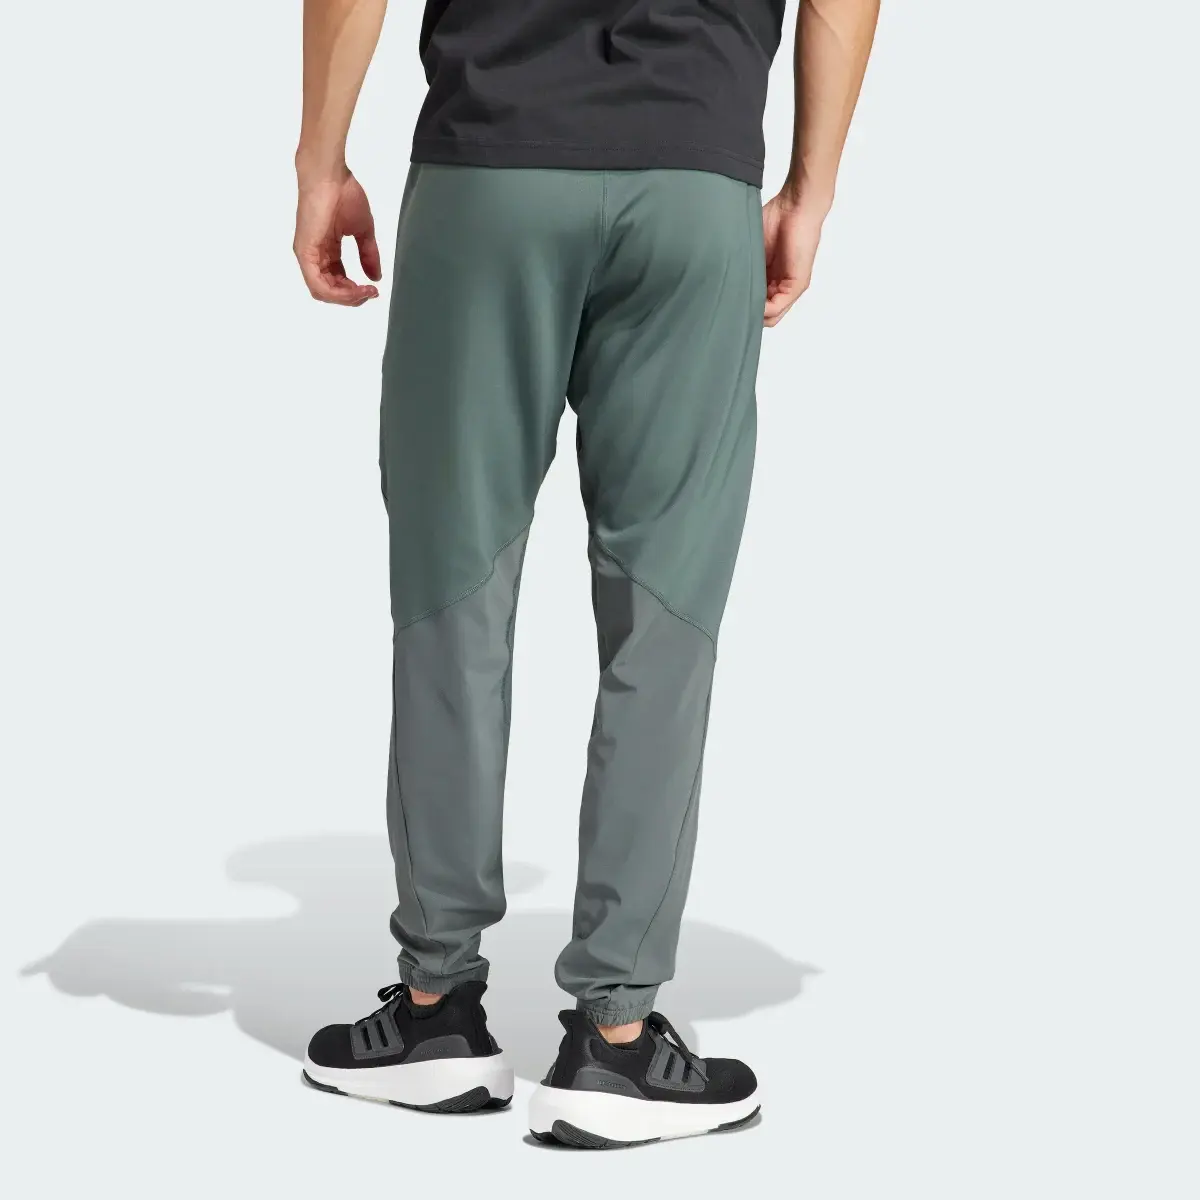 Adidas Designed for Training Workout Joggers. 2